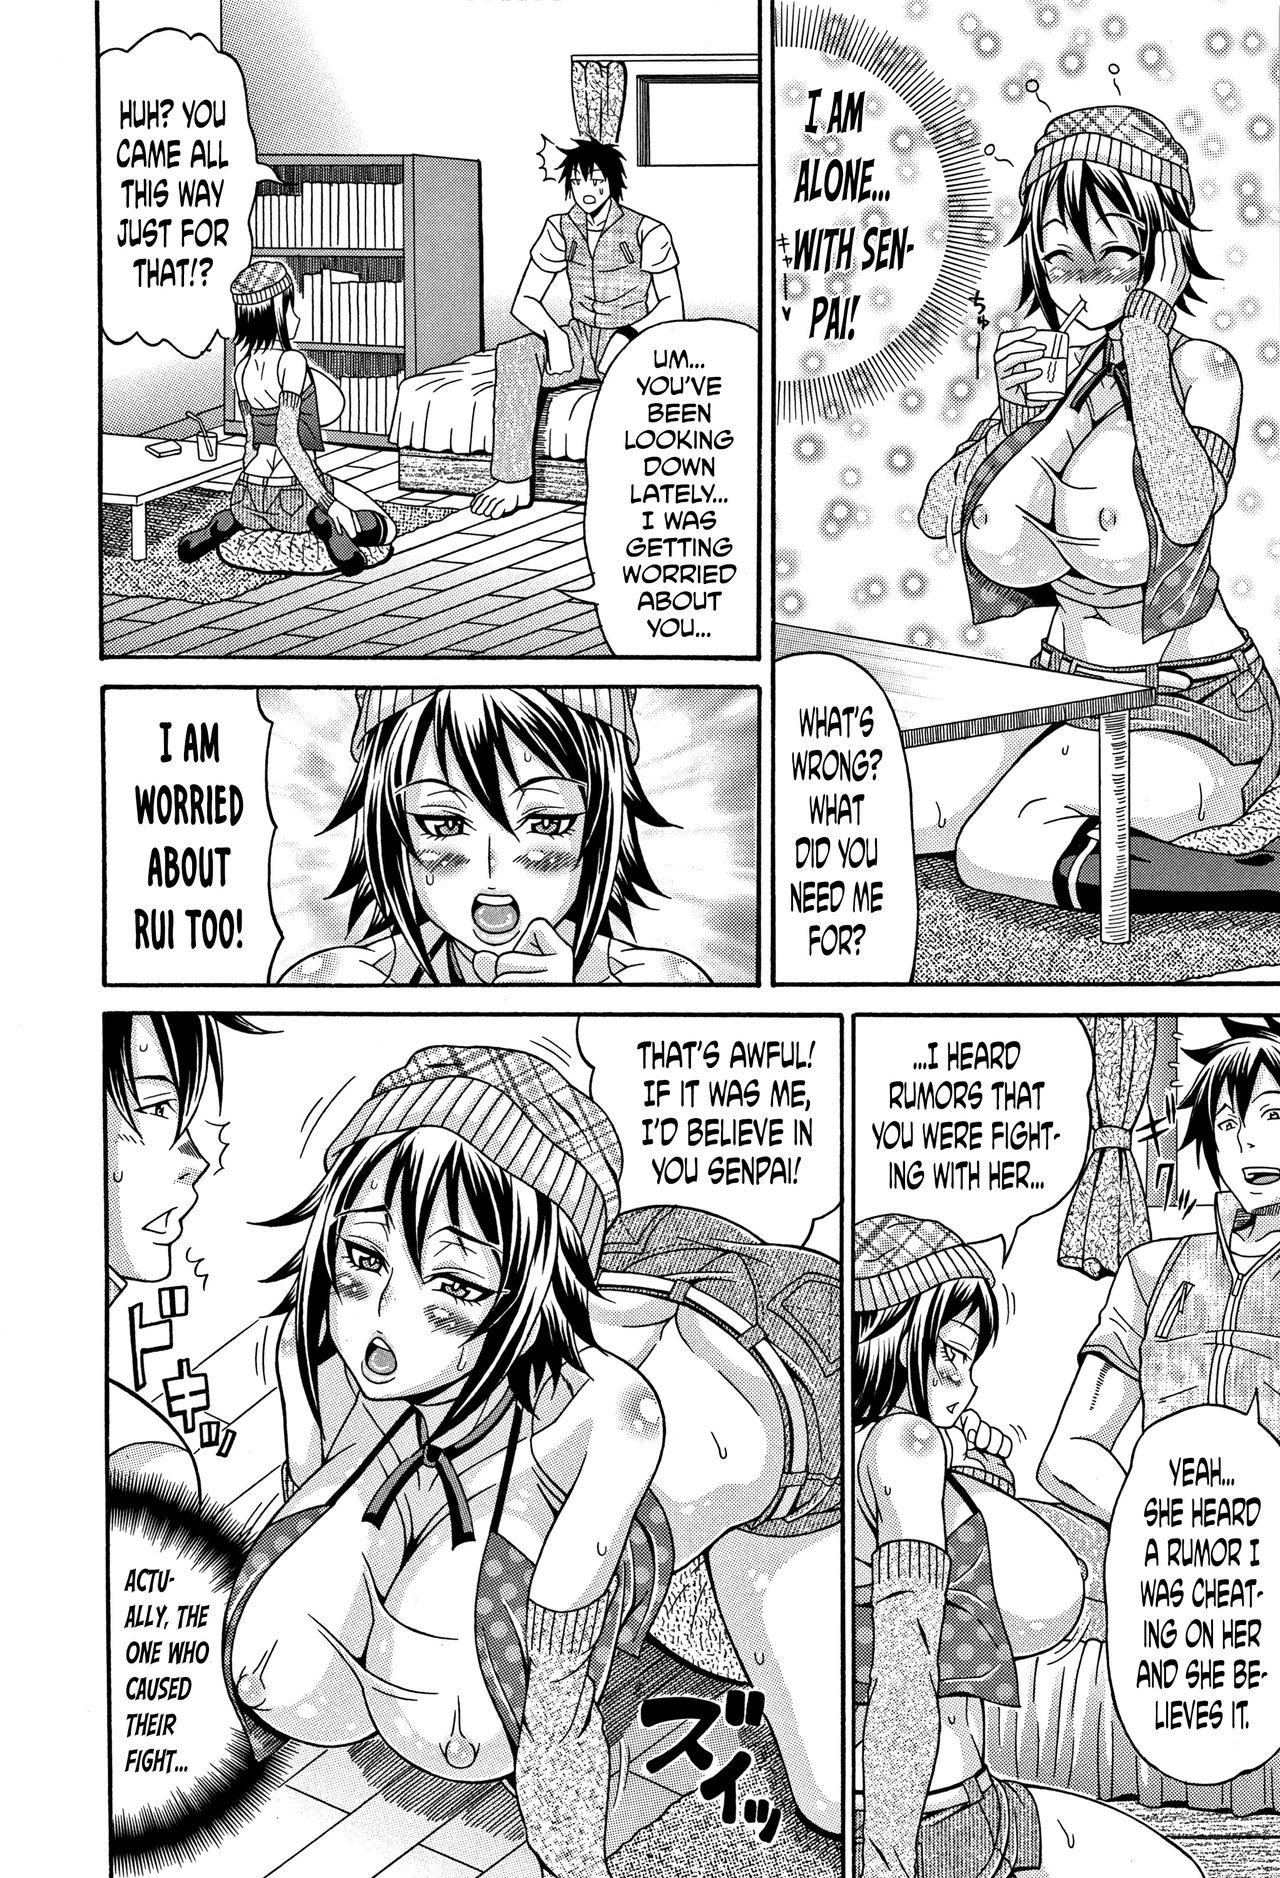 [Andou Hiroyuki] Mamire Chichi - Sticky Tits Feel Hot All Over. Ch.1-5 [English] [doujin-moe.us] 56